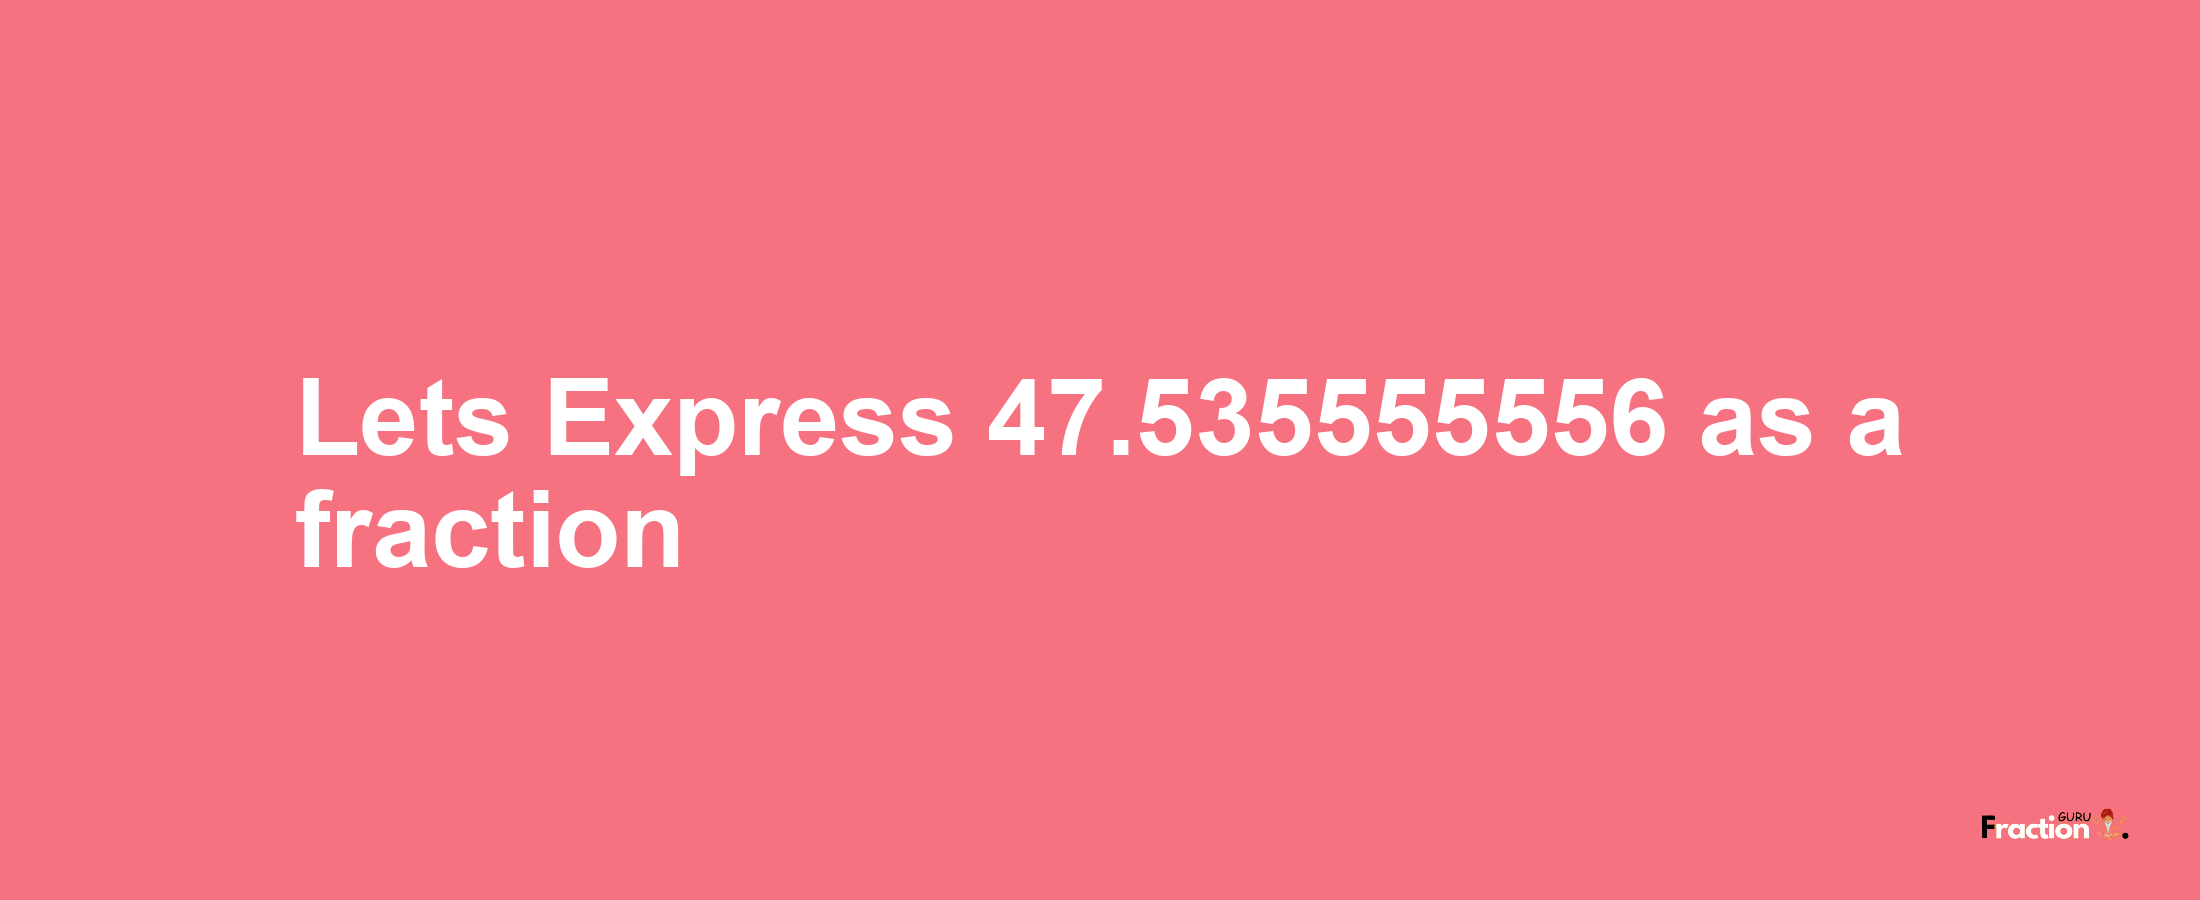 Lets Express 47.535555556 as afraction